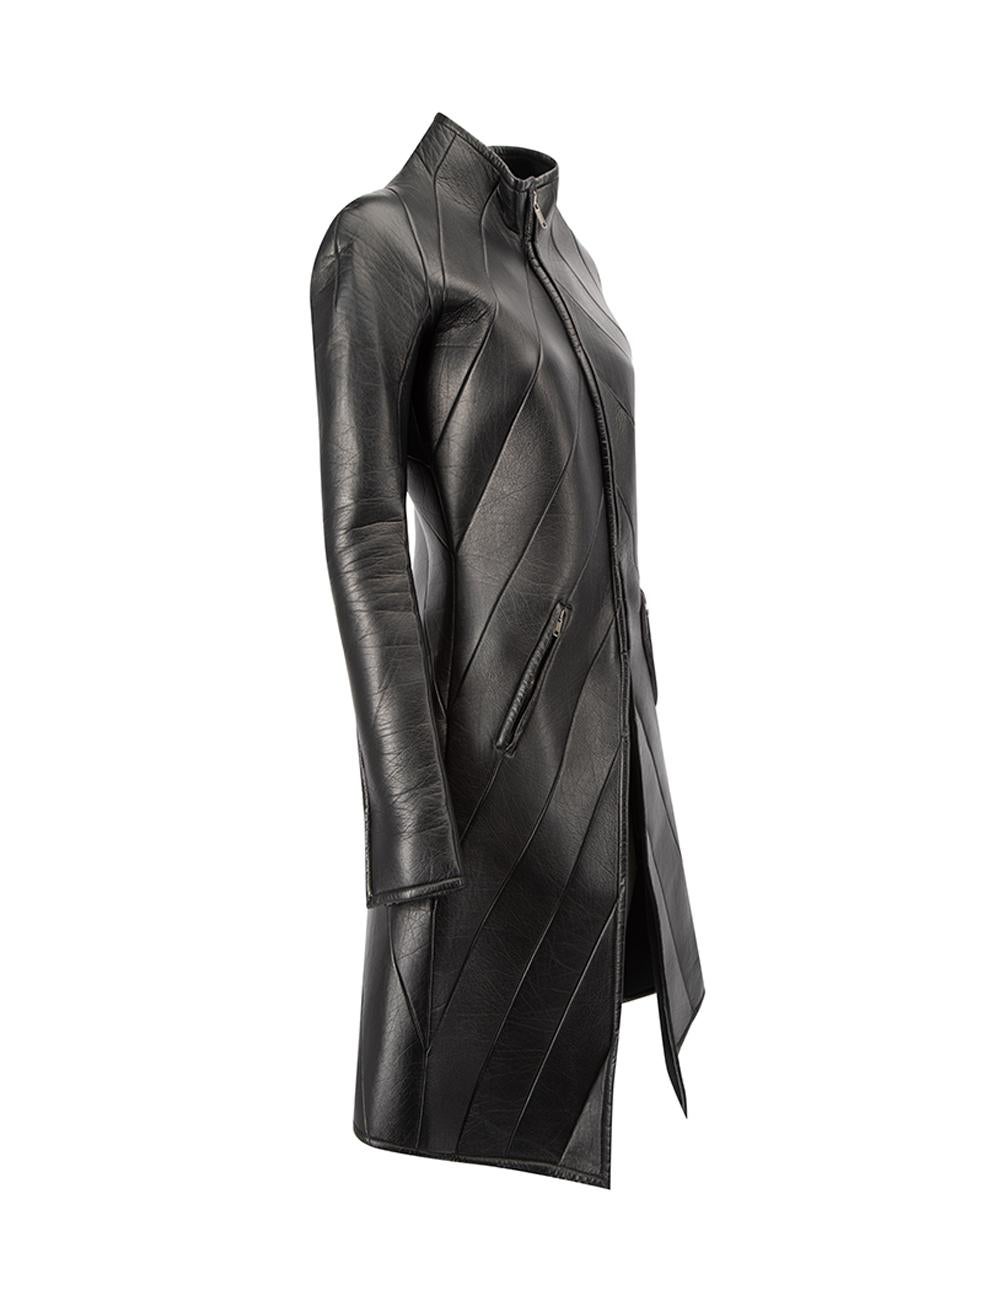 CONDITION is Very good. Hardly any visible wear to coat is evident on this used Gareth Pugh designer resale item.



Details


Fall 2010

Black

Leather

Long coat

Quilted

Front zip closure

Zipped cuffs

Front side zipped pockets





Made in